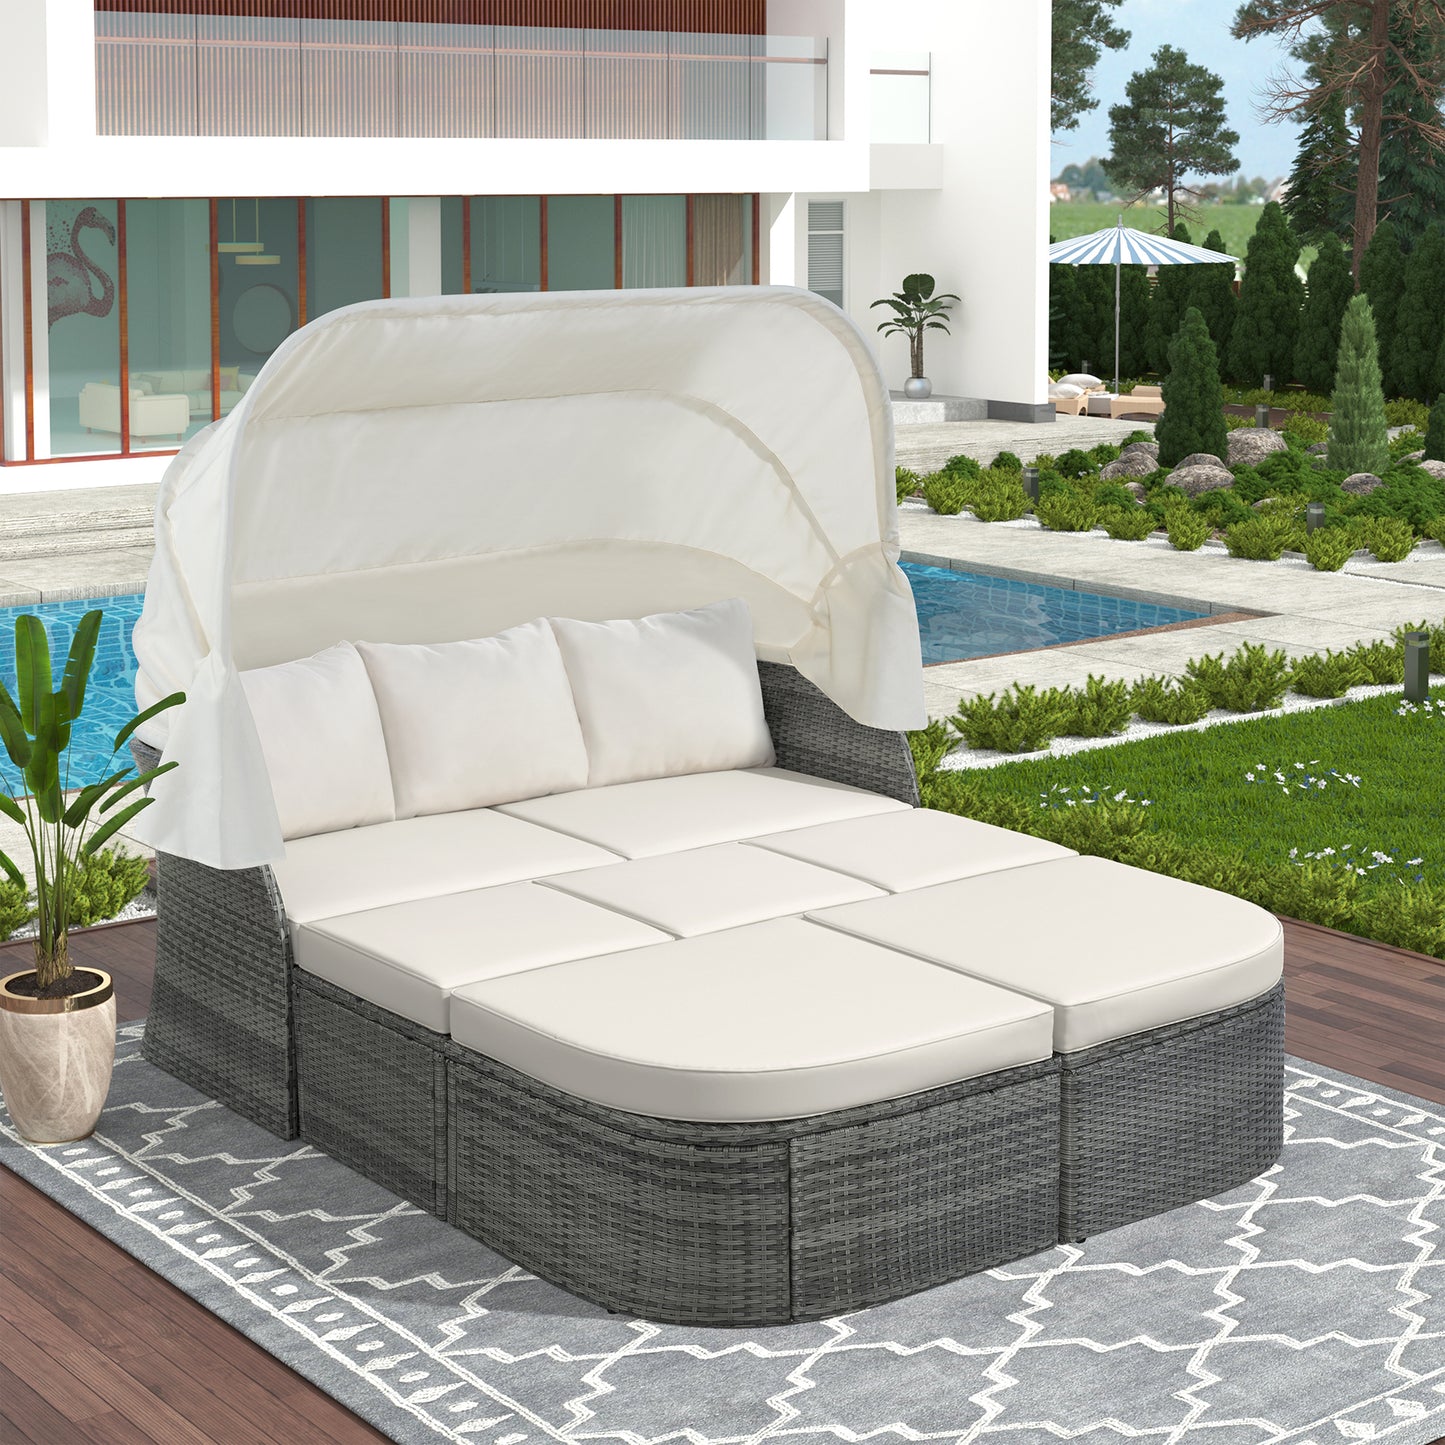 Outdoor Patio Furniture Set Sunbed with Retractable Canopy